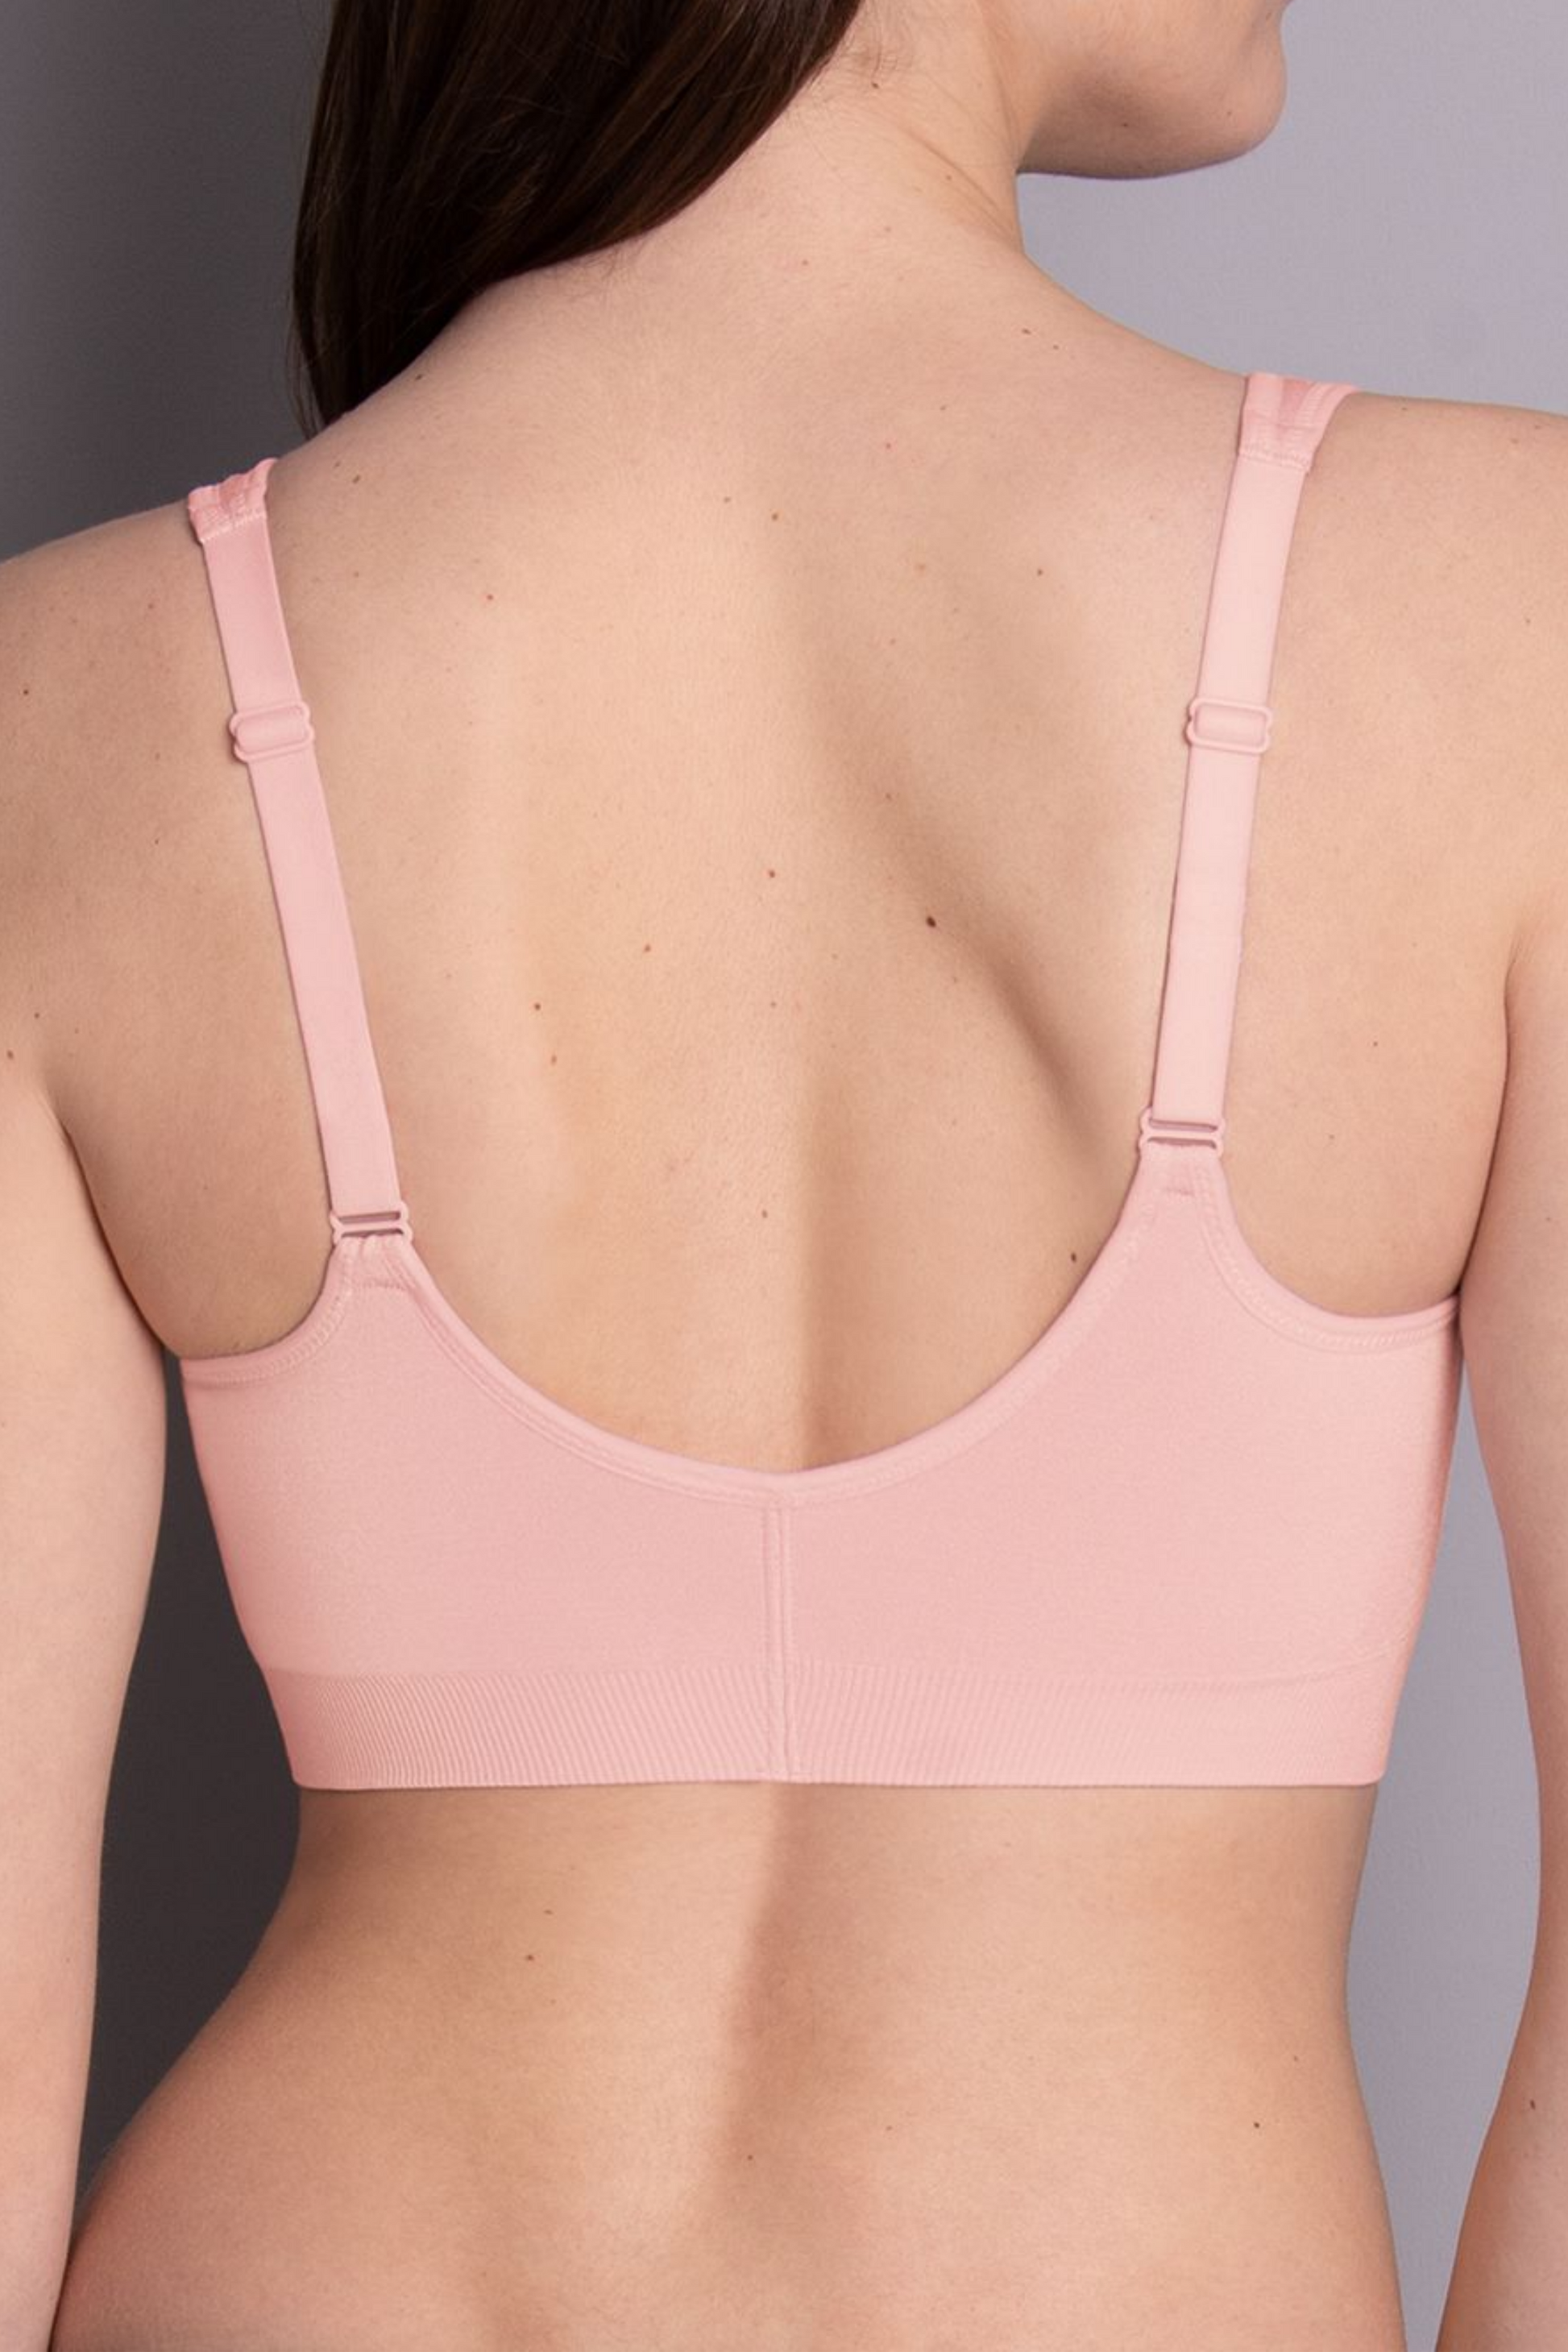 Tonya Flair Mastectomy Bra With Moulded Cups In Blush Pink - Anita –  BraTopia